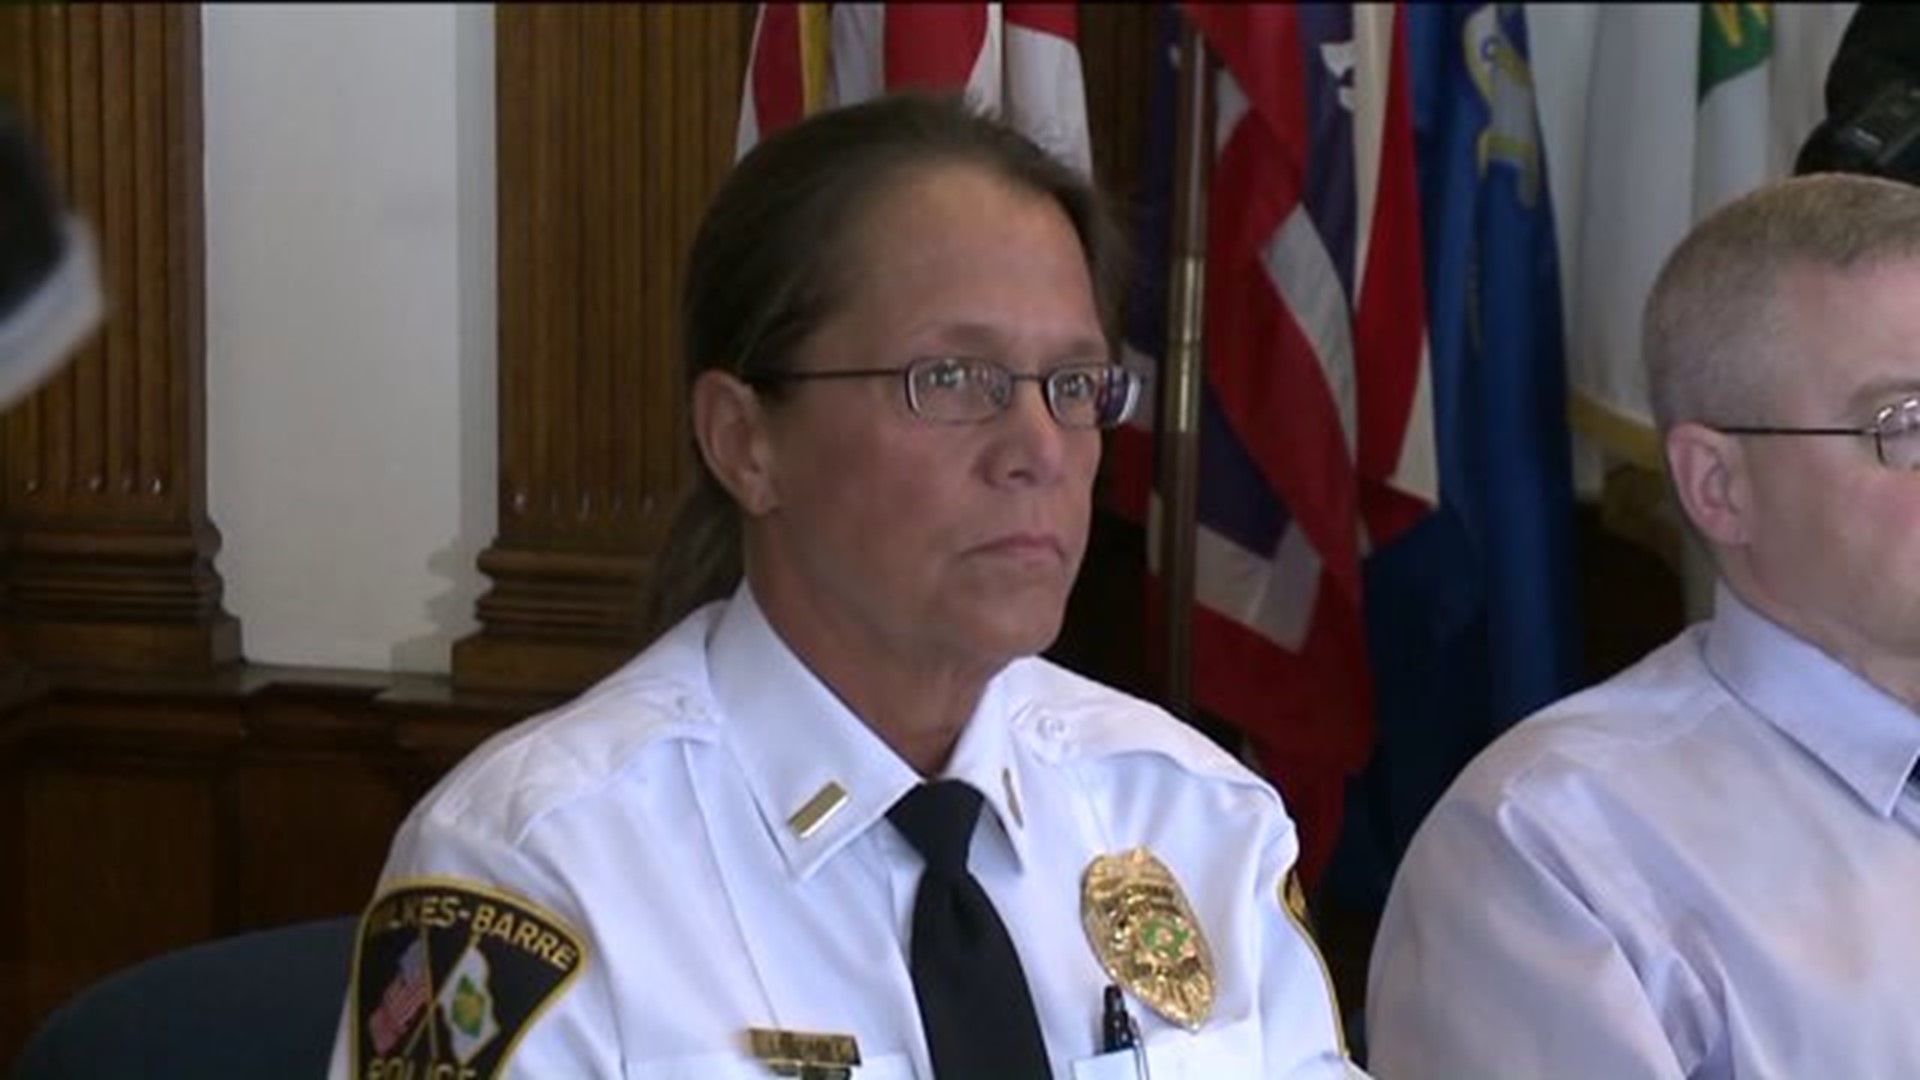 Acting Police Chief Appointed in Wilkes-Barre